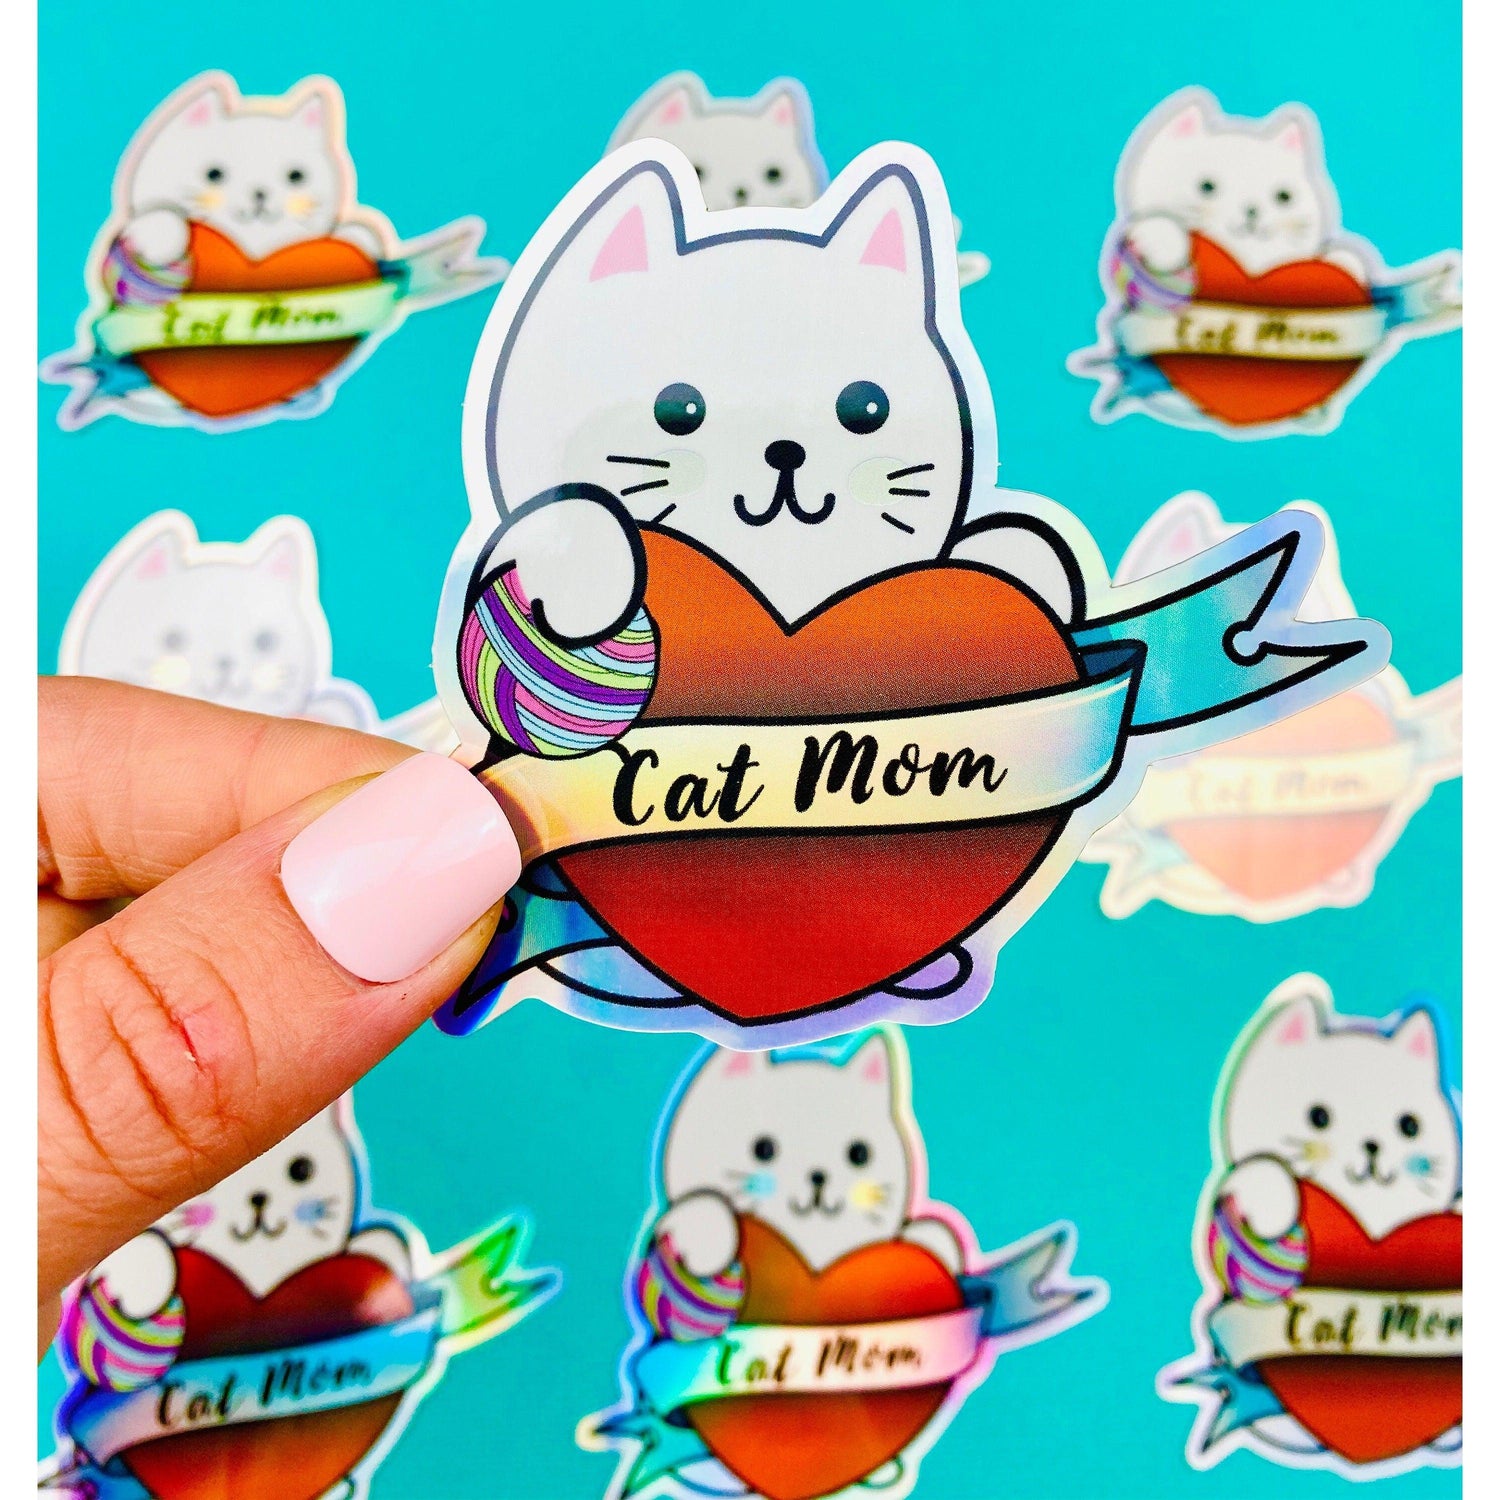 Kawaii Kitty Cat Mom Holographic Sticker - Ottos Grotto :: Stickers For Your Stuff